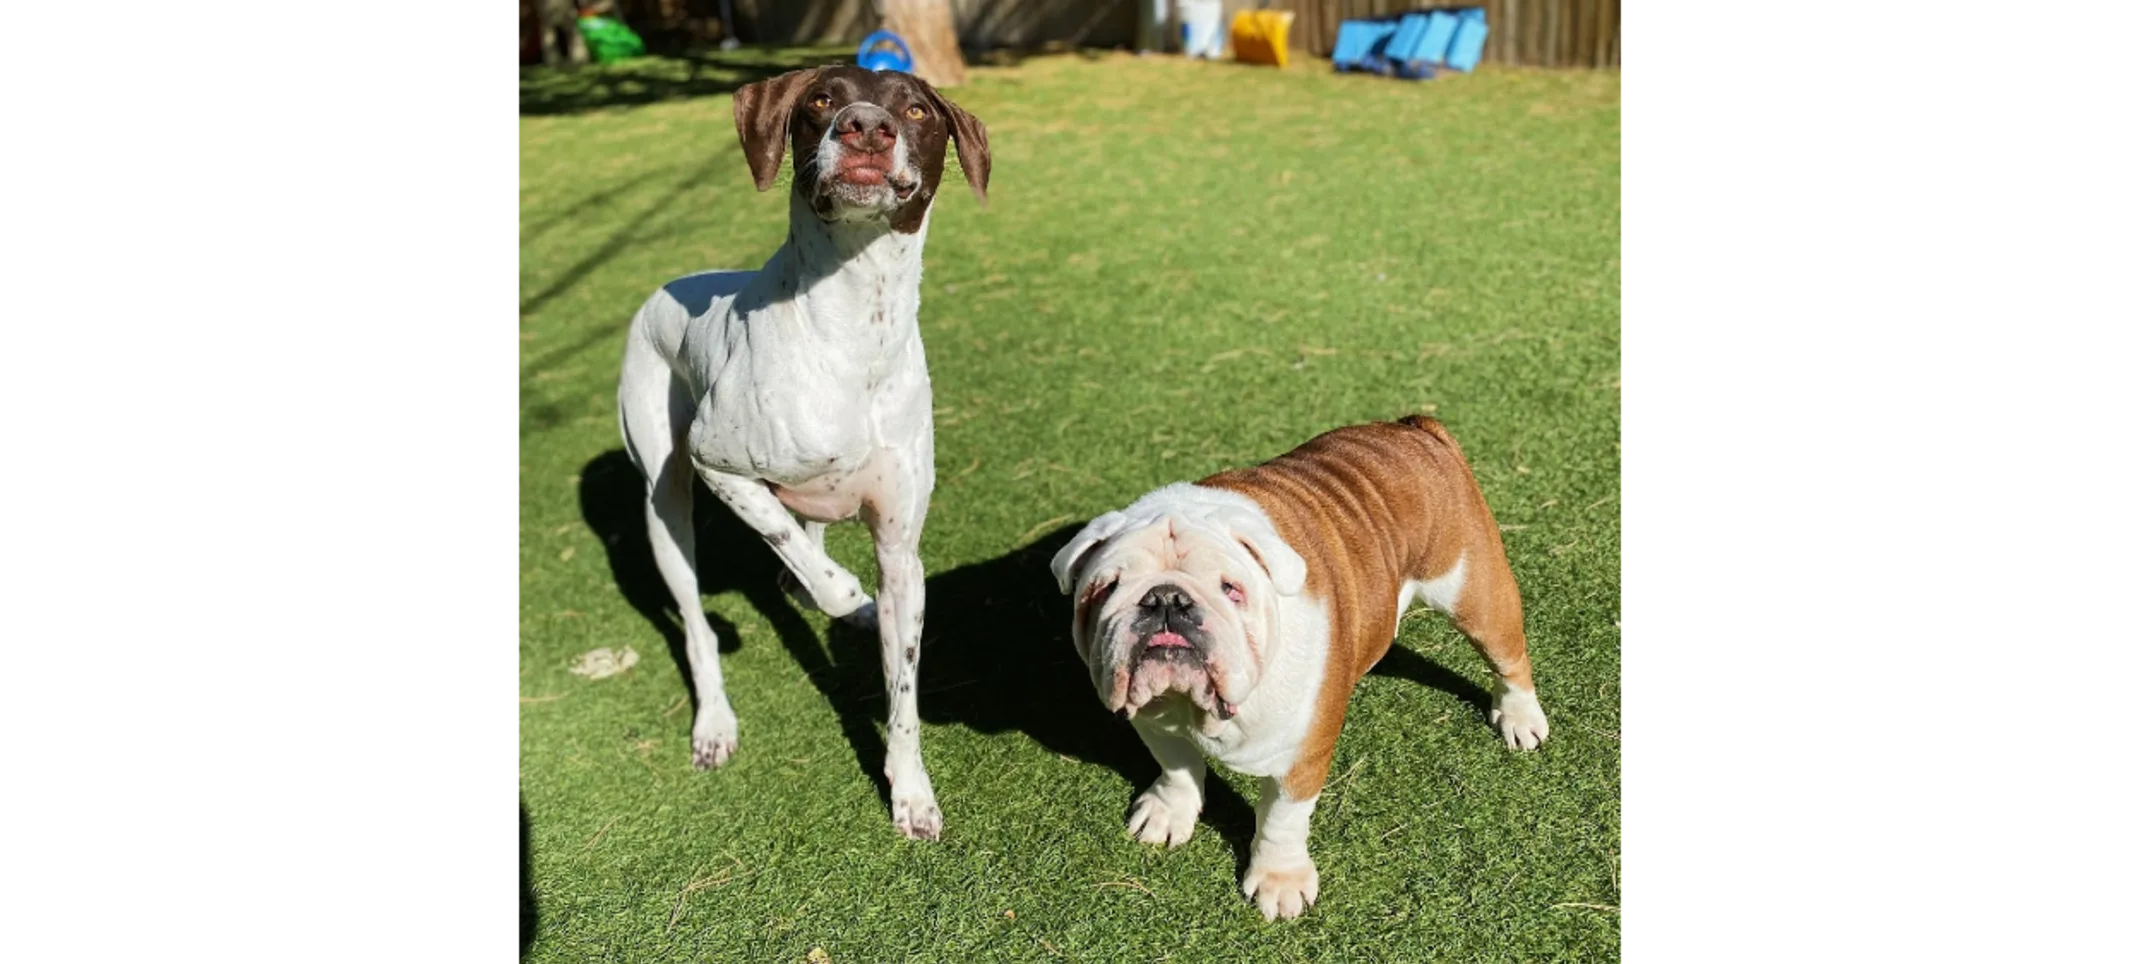 Bulldog and White/Brown Dog Standing in the Grass Together